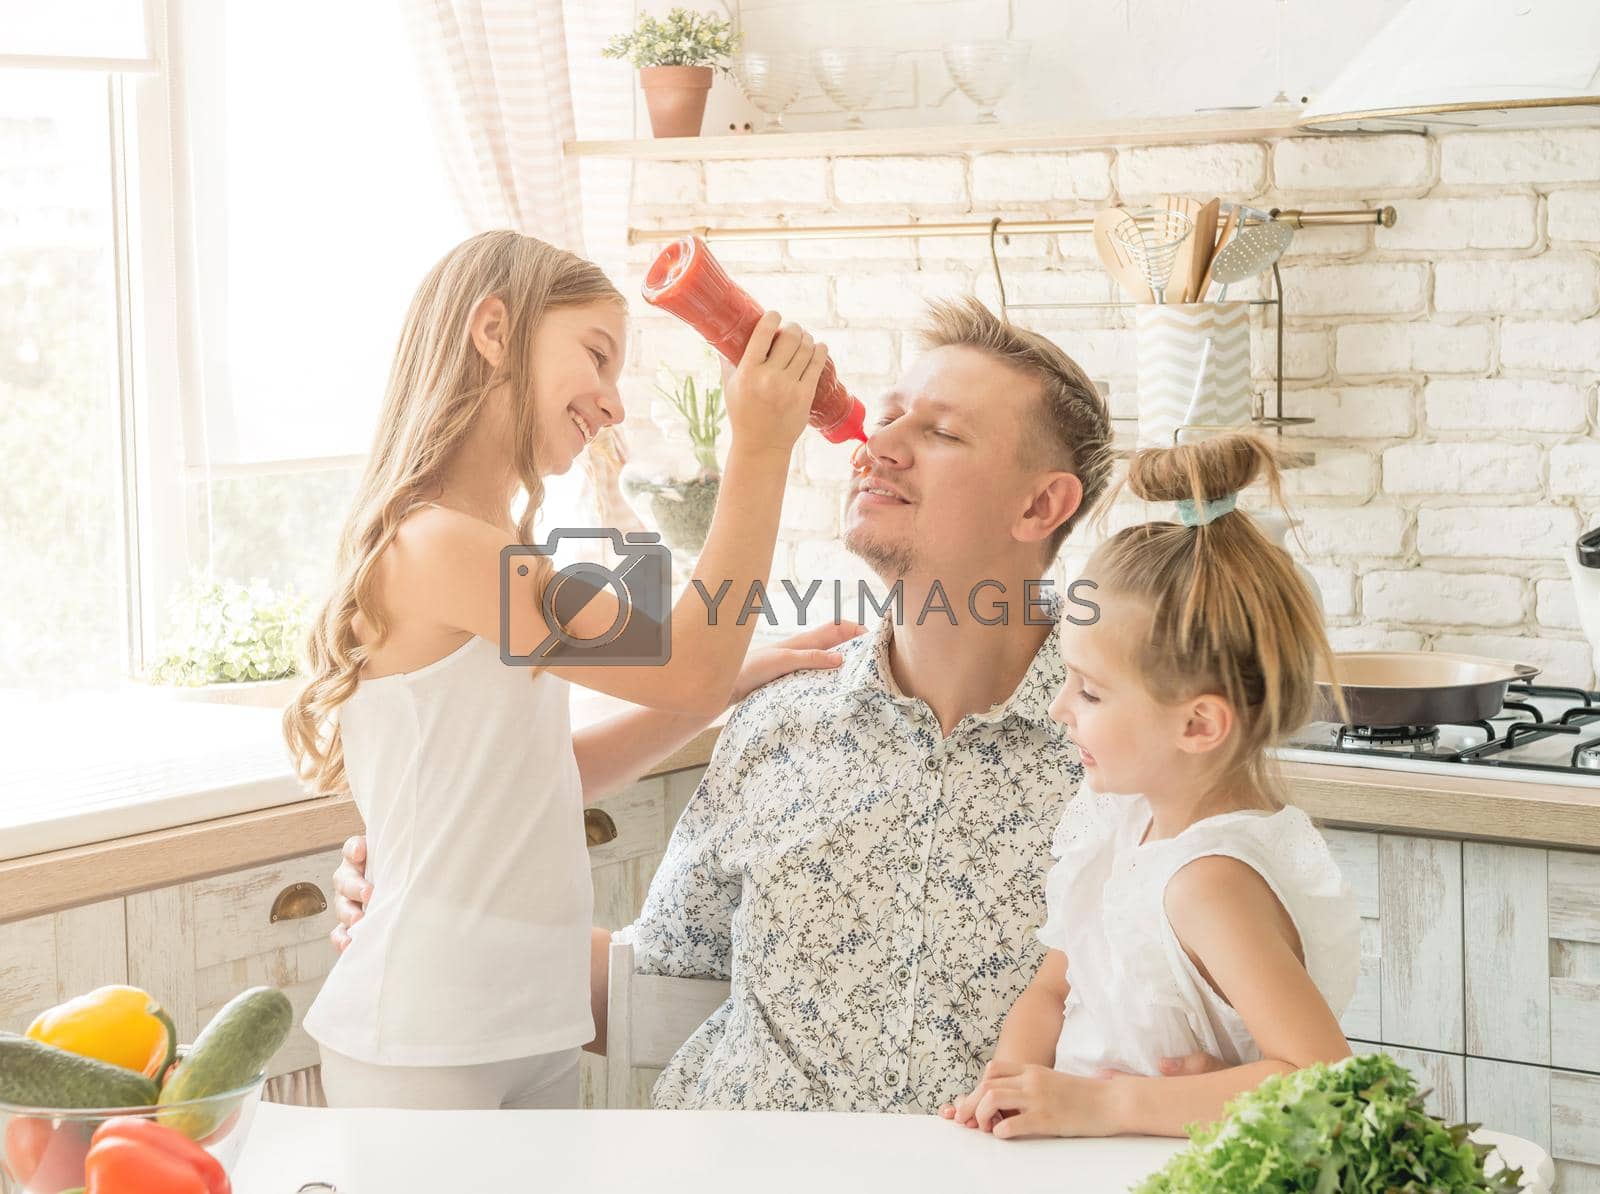 Royalty free image of dad with daughters have a fun by tan4ikk1